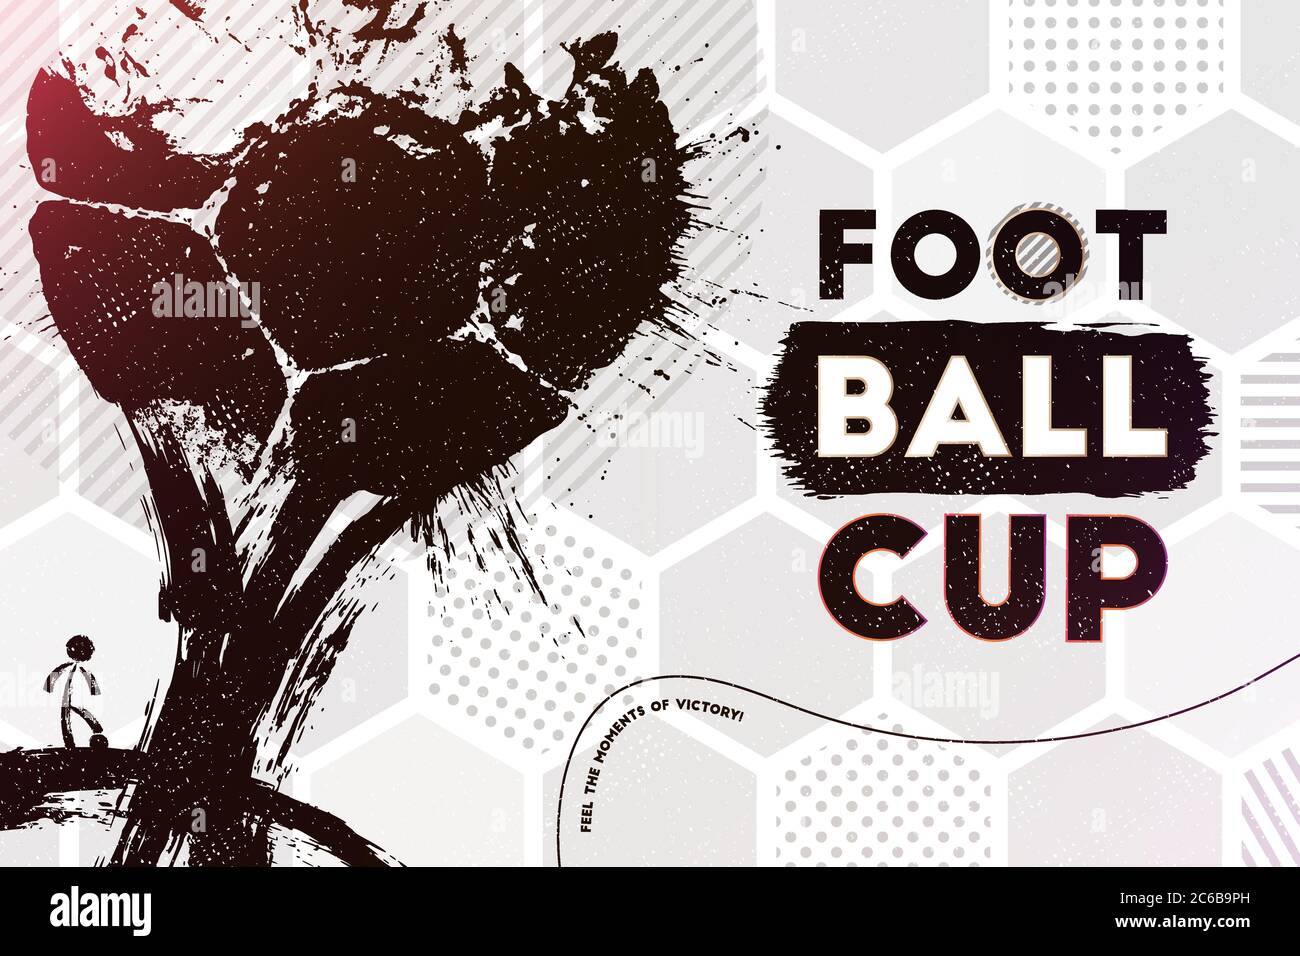 Football cup. Vector illustration of abstract street football background with grunge soccer ball print for your design Stock Vector